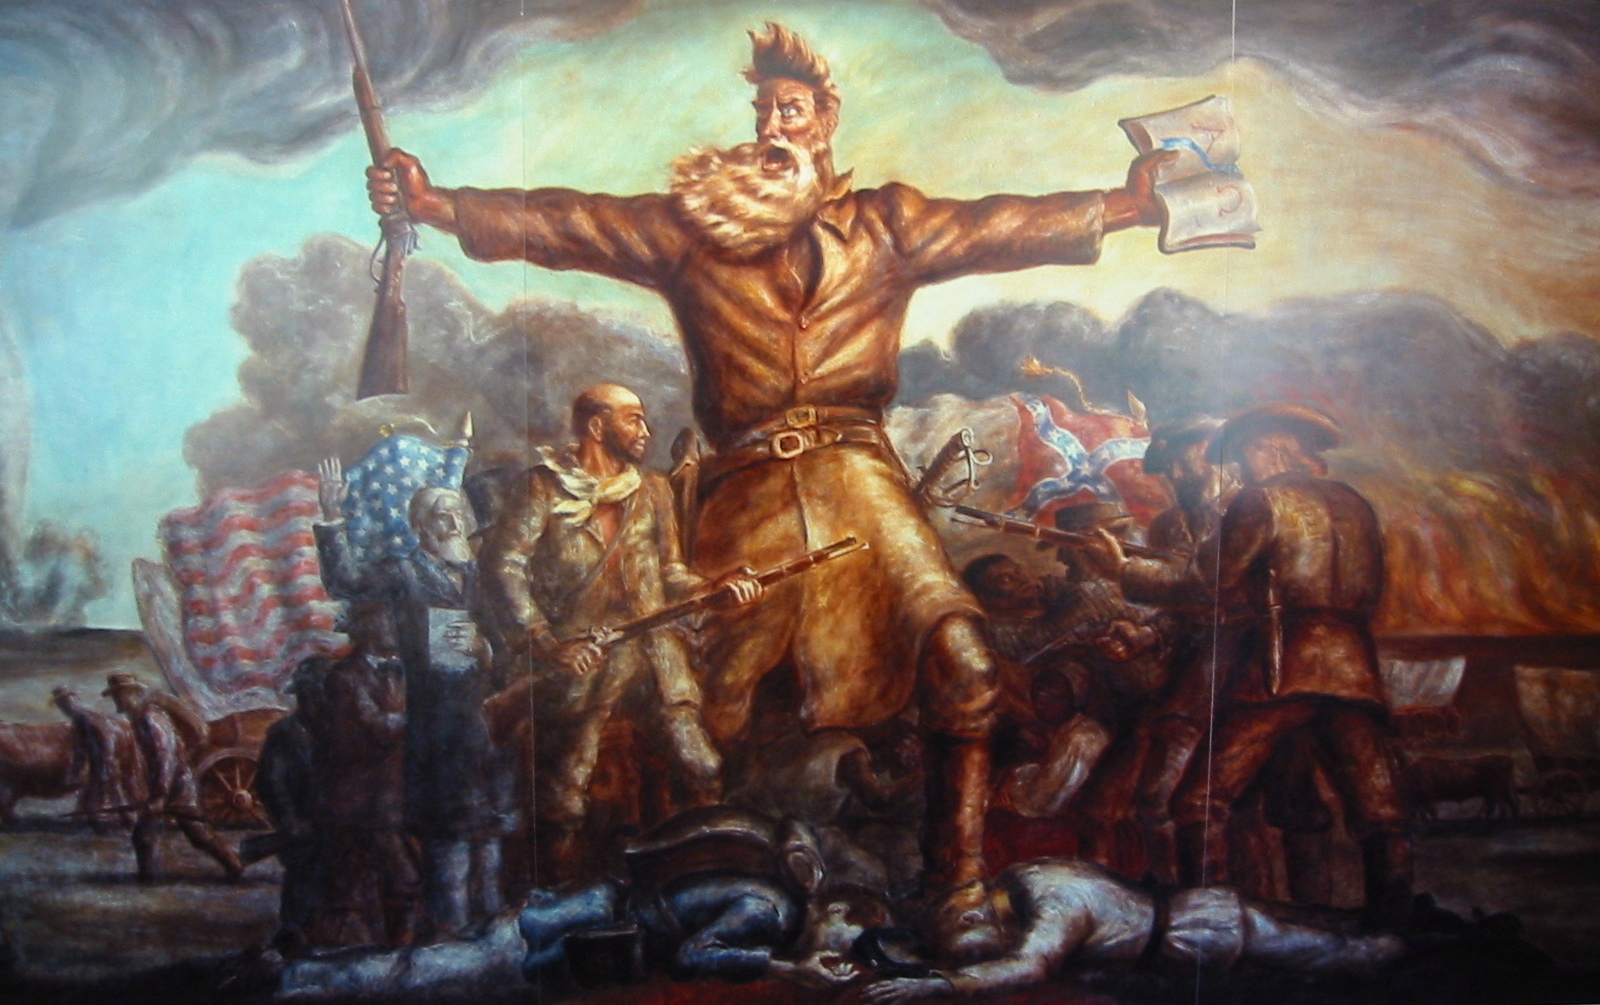 Men like John Brown appear only once or twice in a thousand years